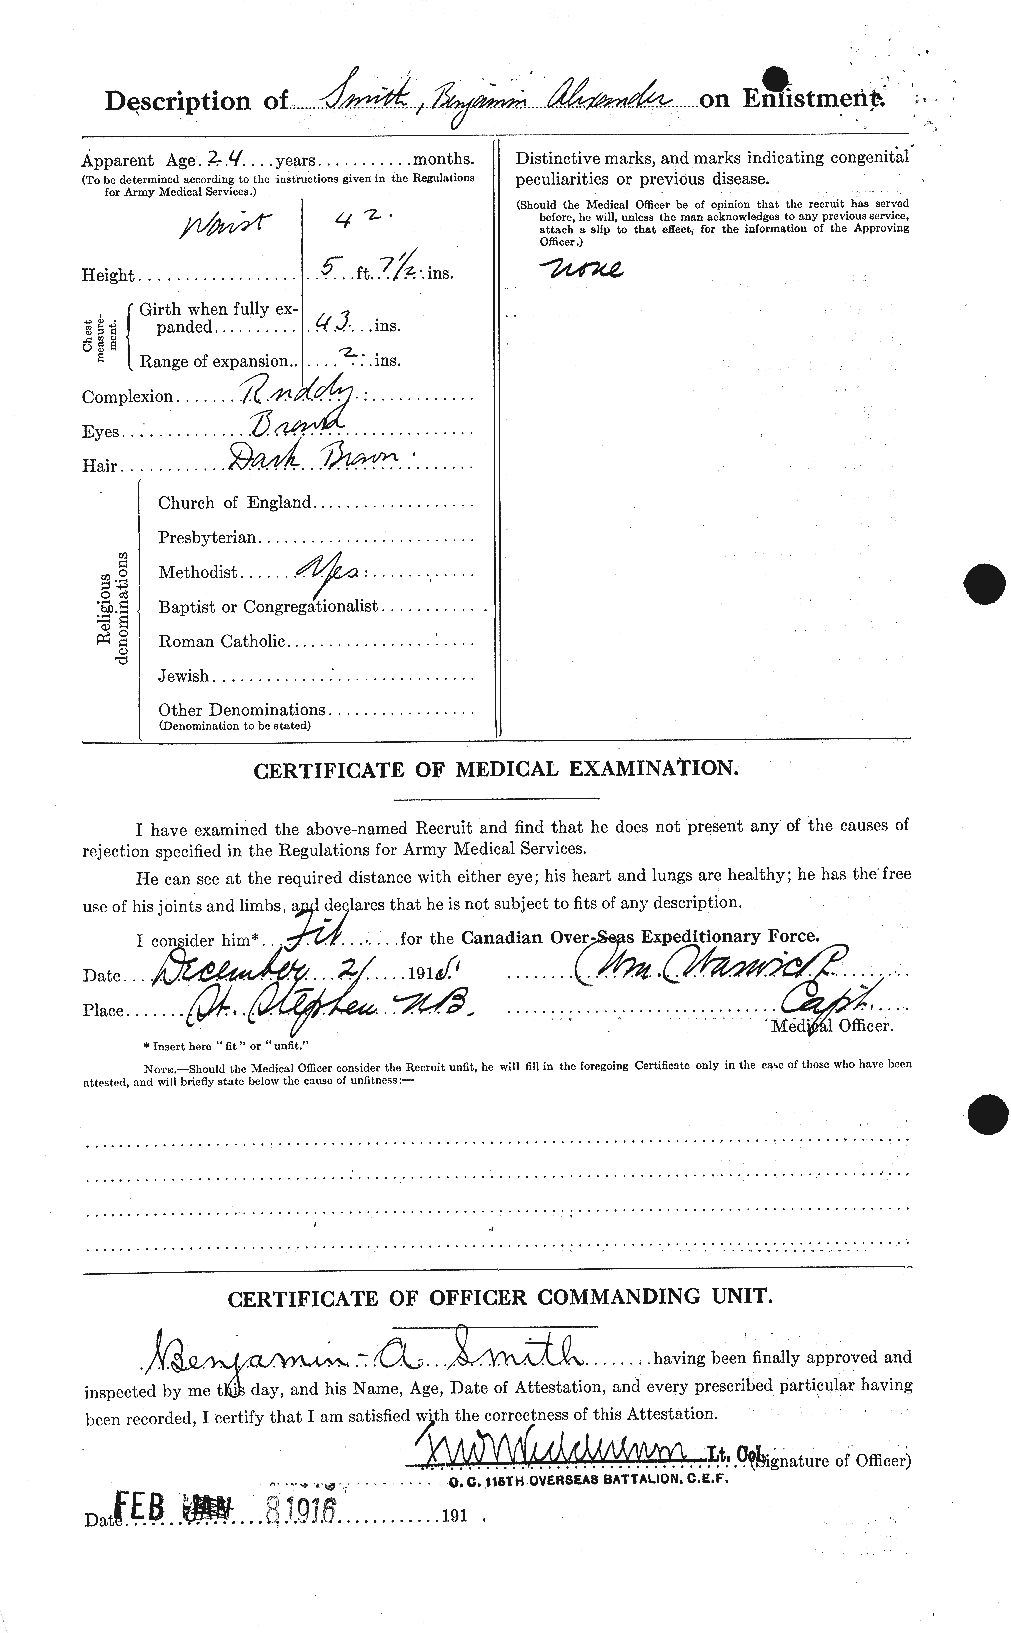 Personnel Records of the First World War - CEF 101171b